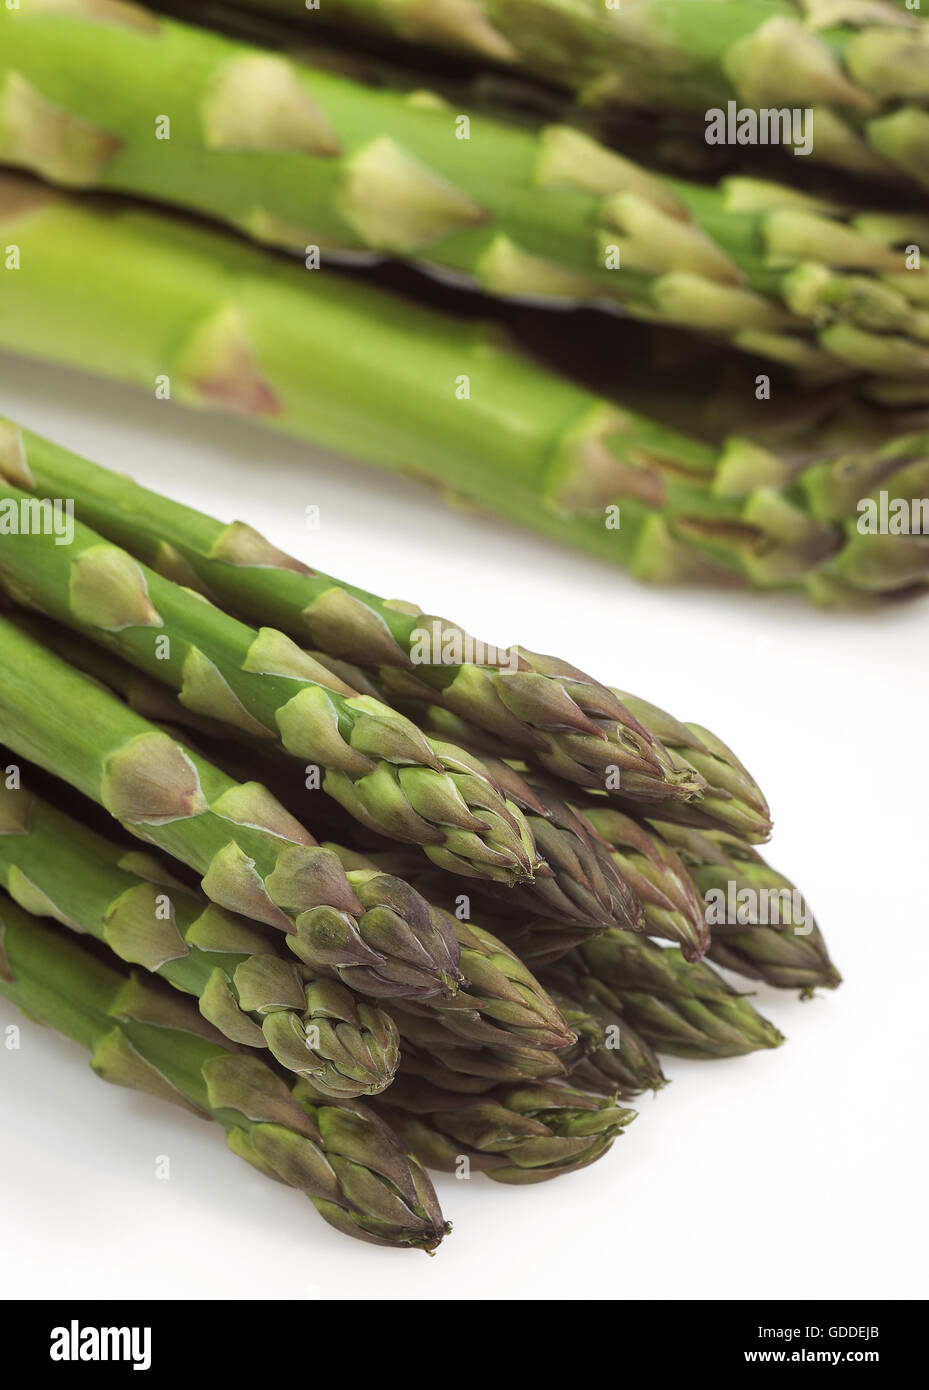 Green Asparagus, asparagus officinalis, Vegetables against White Background Stock Photo